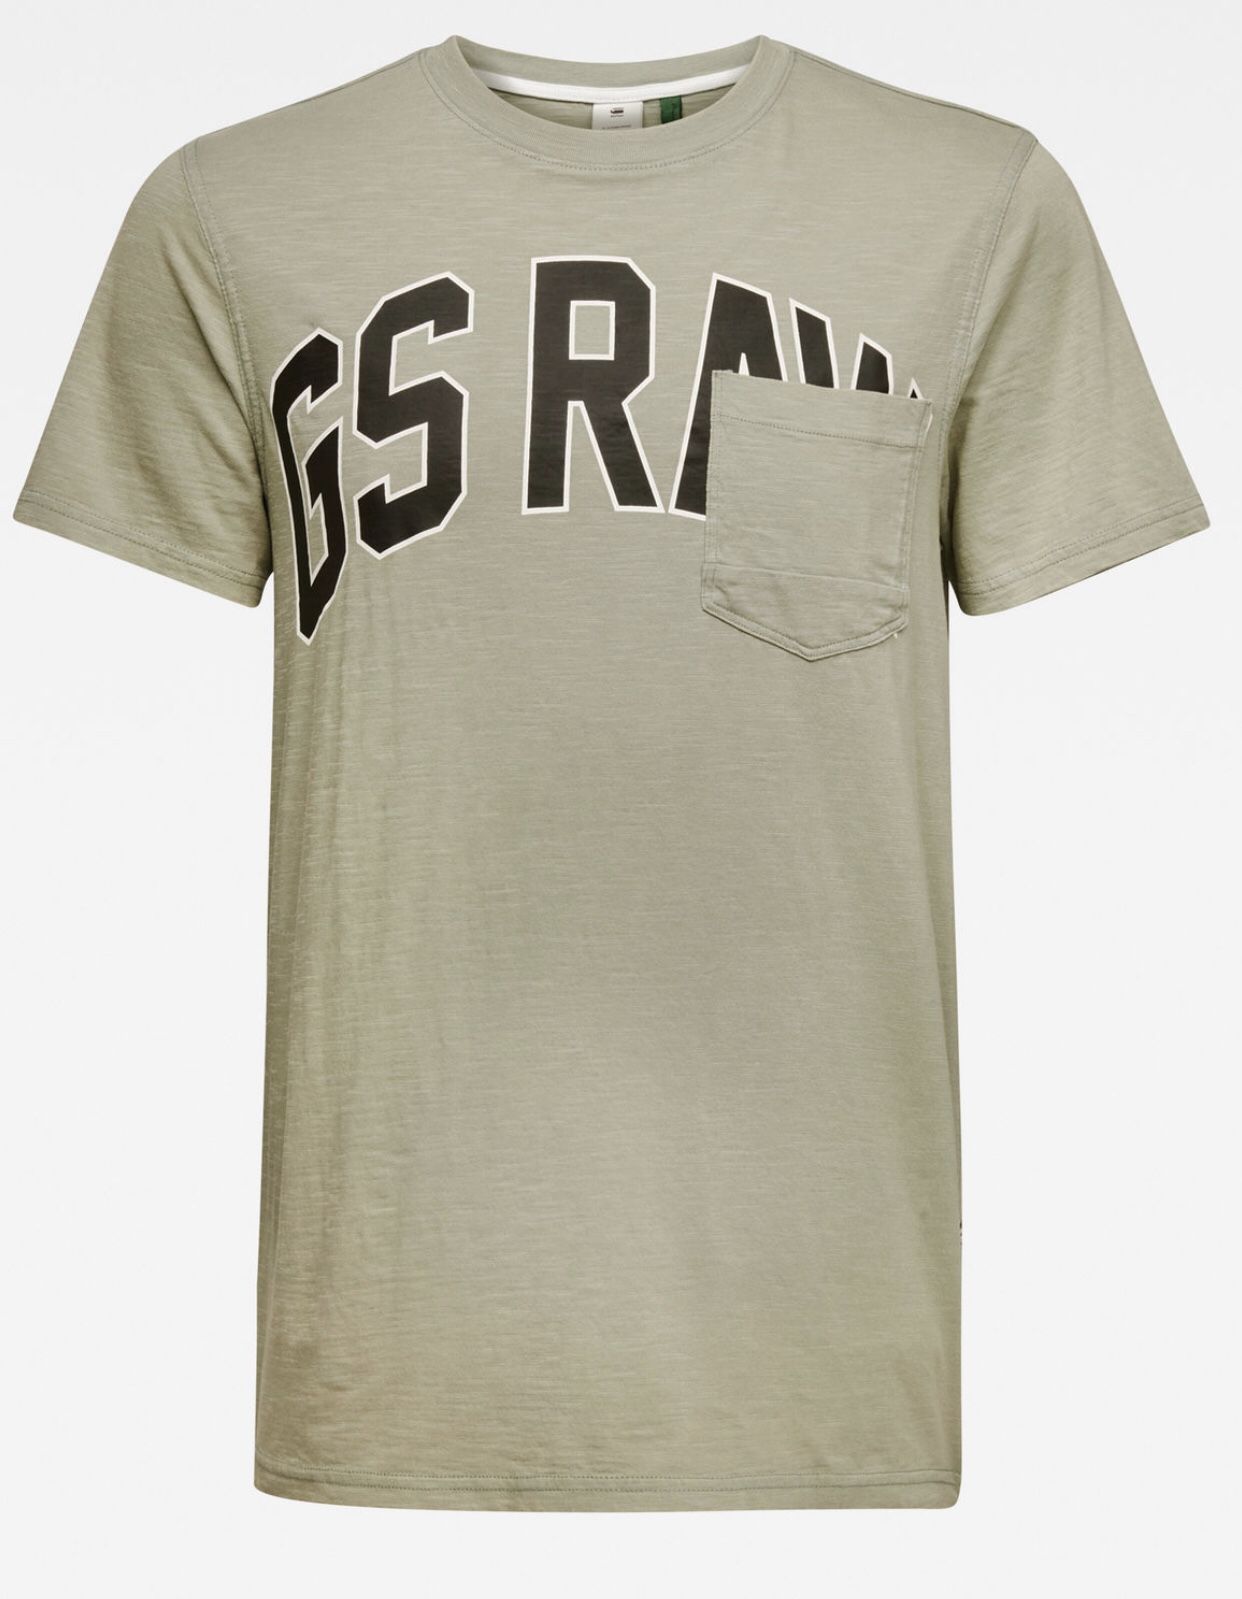 G-Star RAW Men Printed Cotton Blend Tee T Shirt Short Sleeve Size XL NEW Very Rare. Brand New. Ships same day.